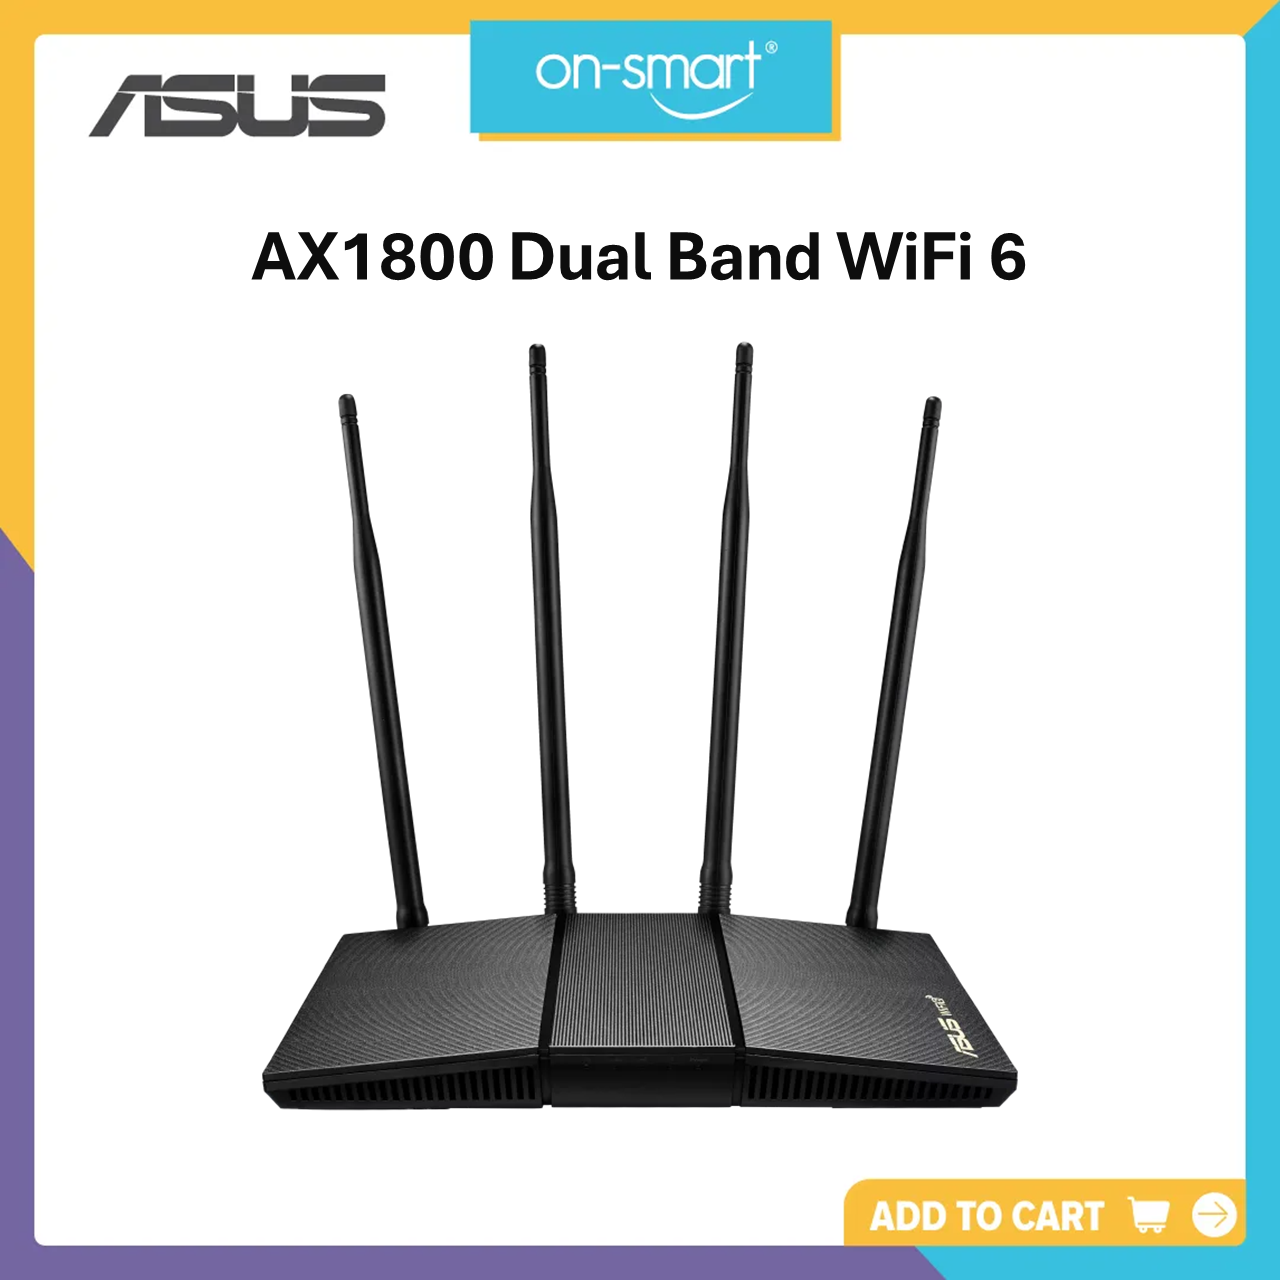 ASUS Router AX1800 Dual Band WiFi 6 Router